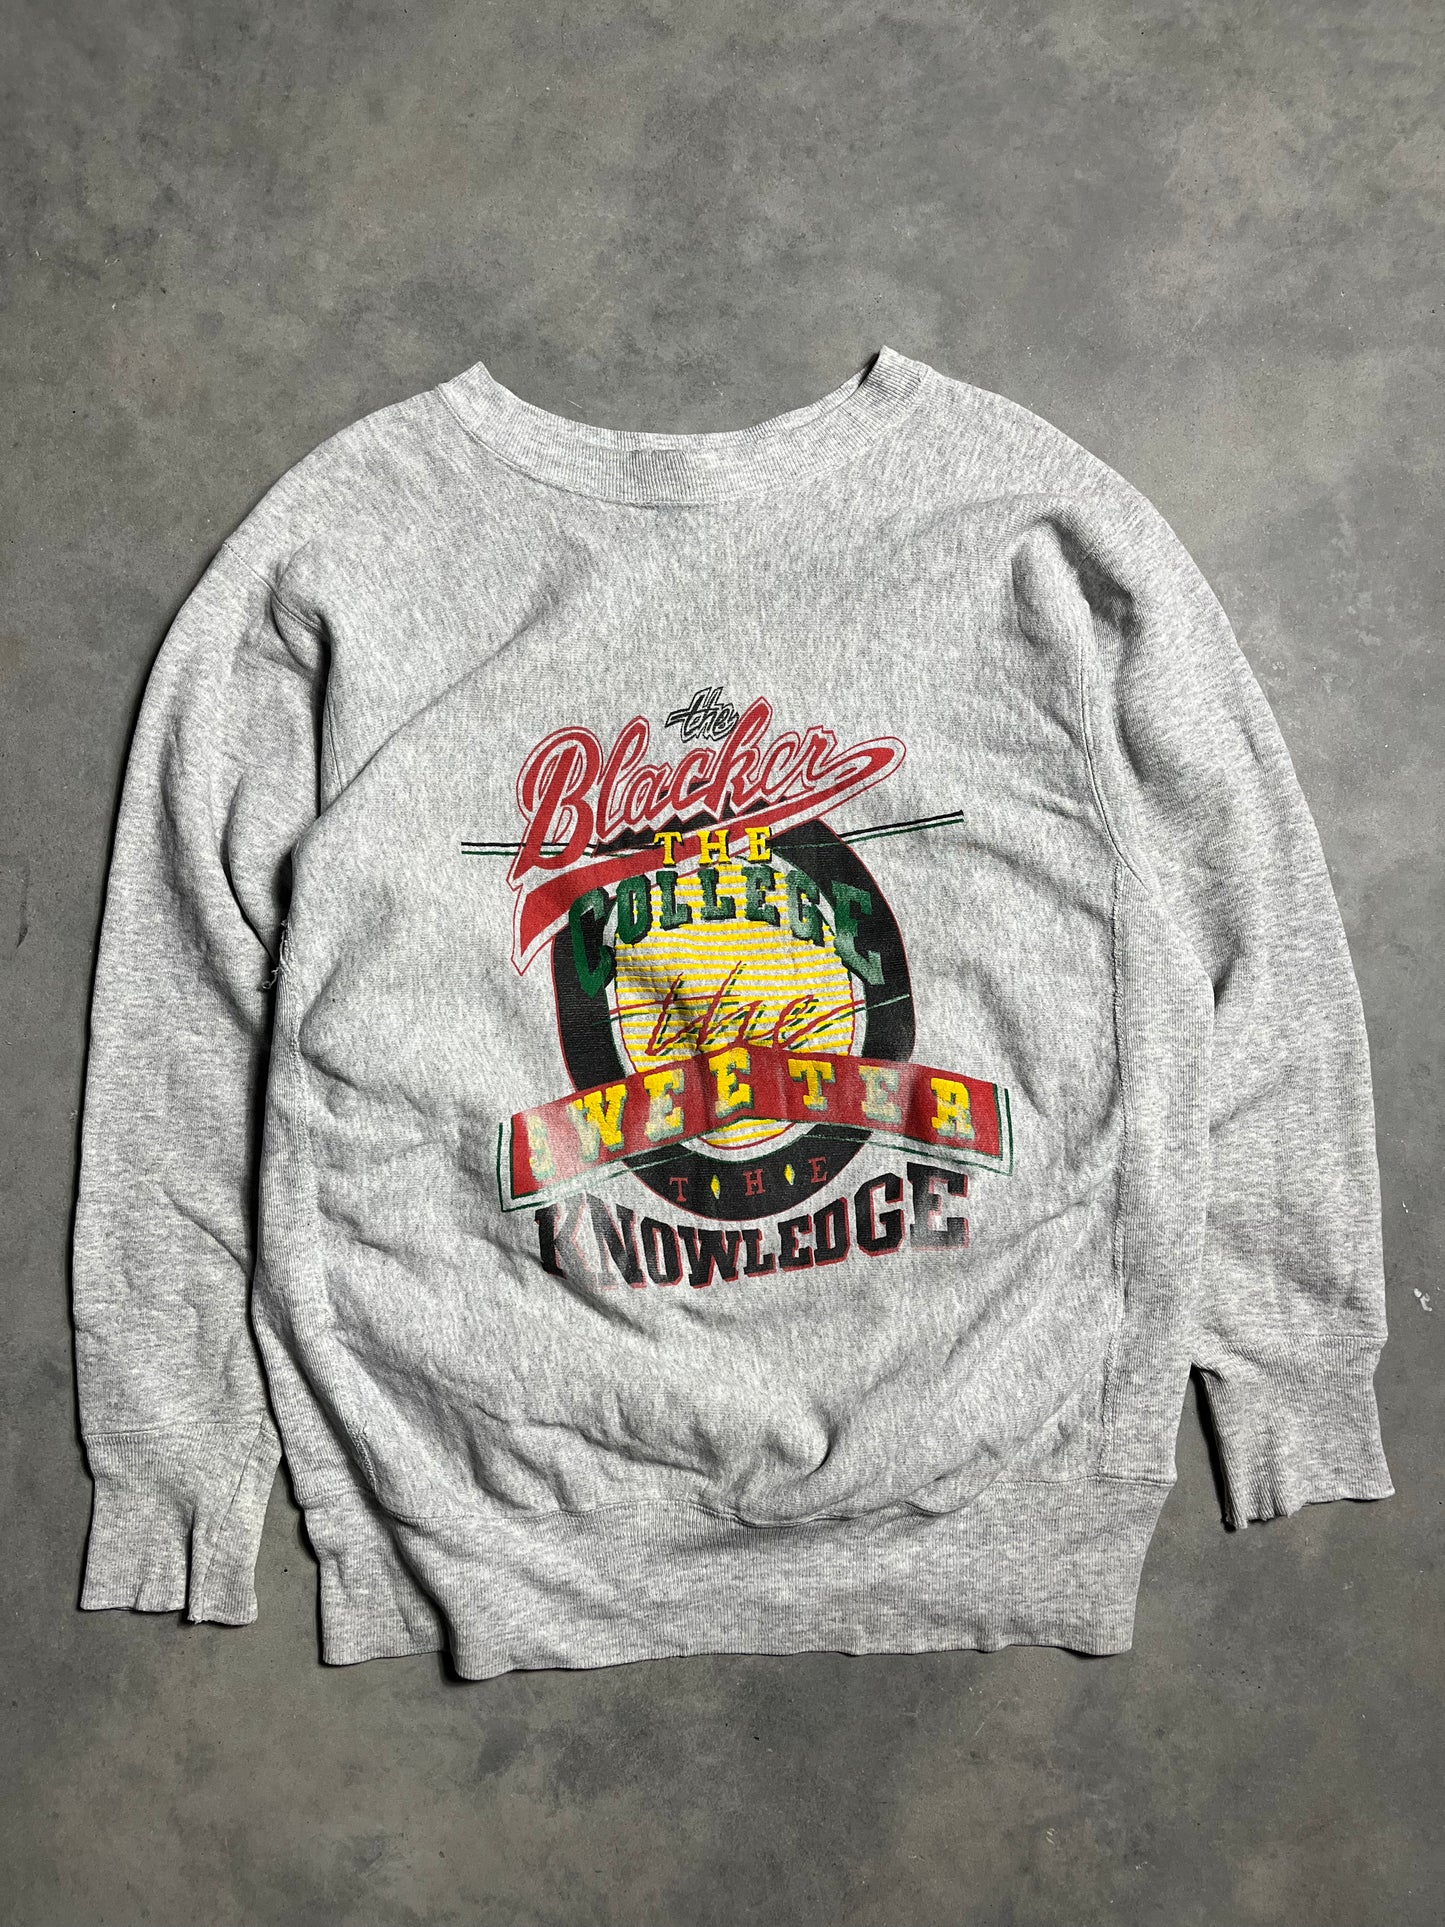 90’s The Blacker the College, The Sweeter the Knowledge Vintage HBCU Crewneck (XL)